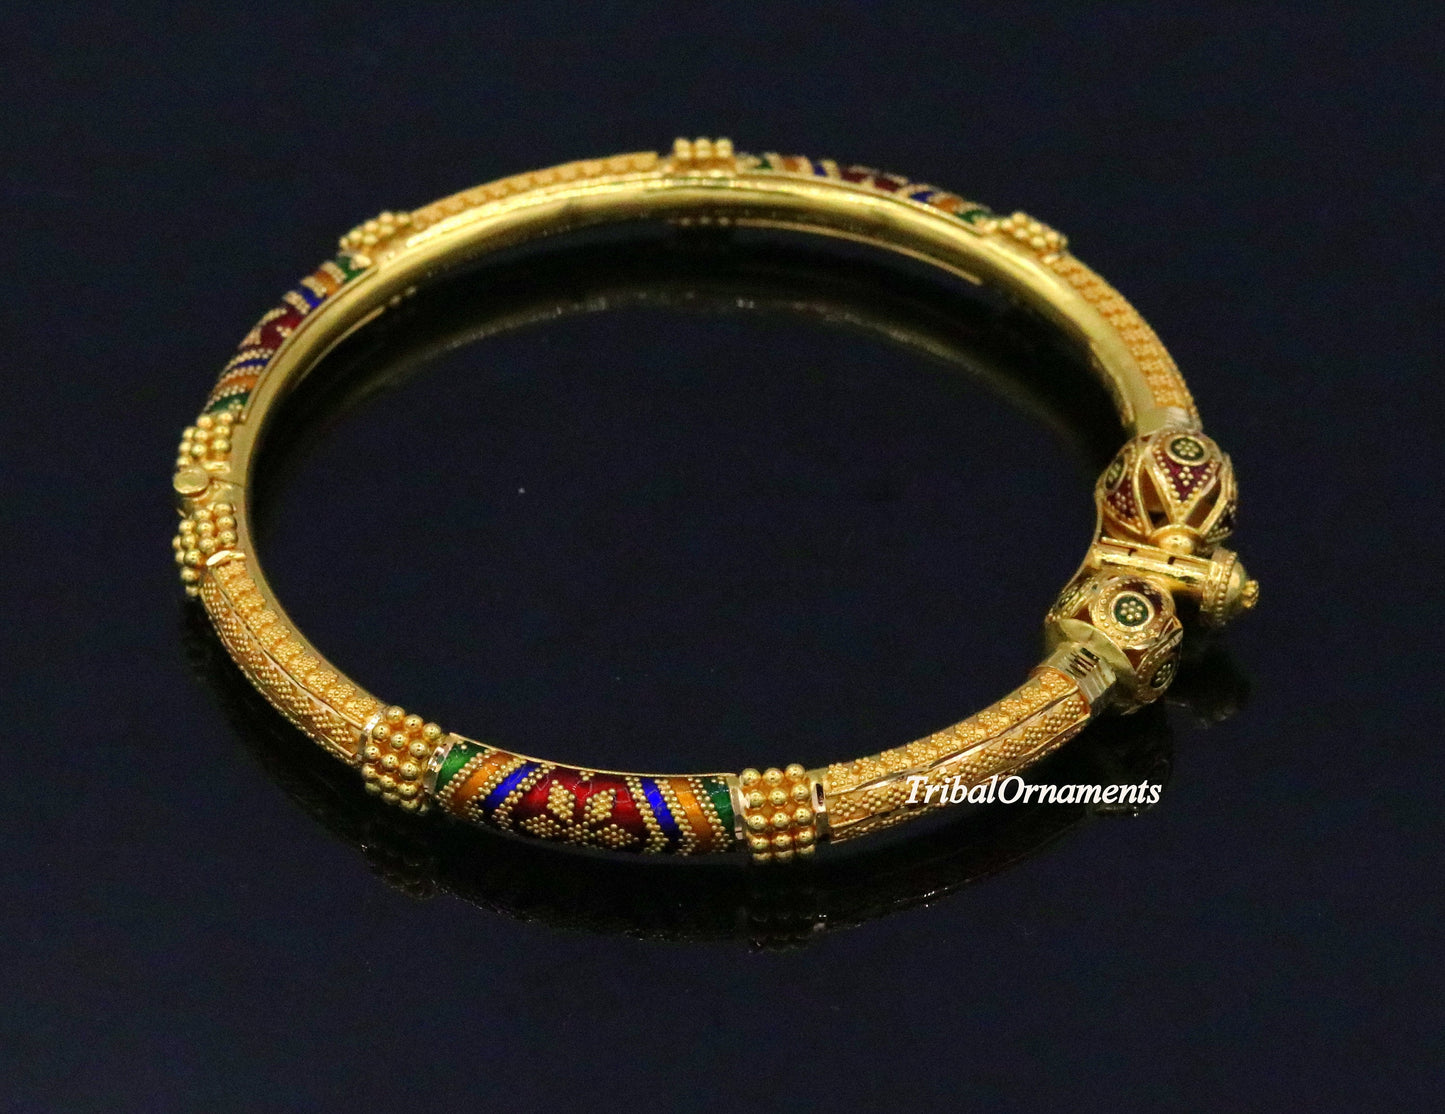 Vintage antique design handmade kada bangle 22kt yellow gold women's excellent jewelry From Rajasthan India - TRIBAL ORNAMENTS